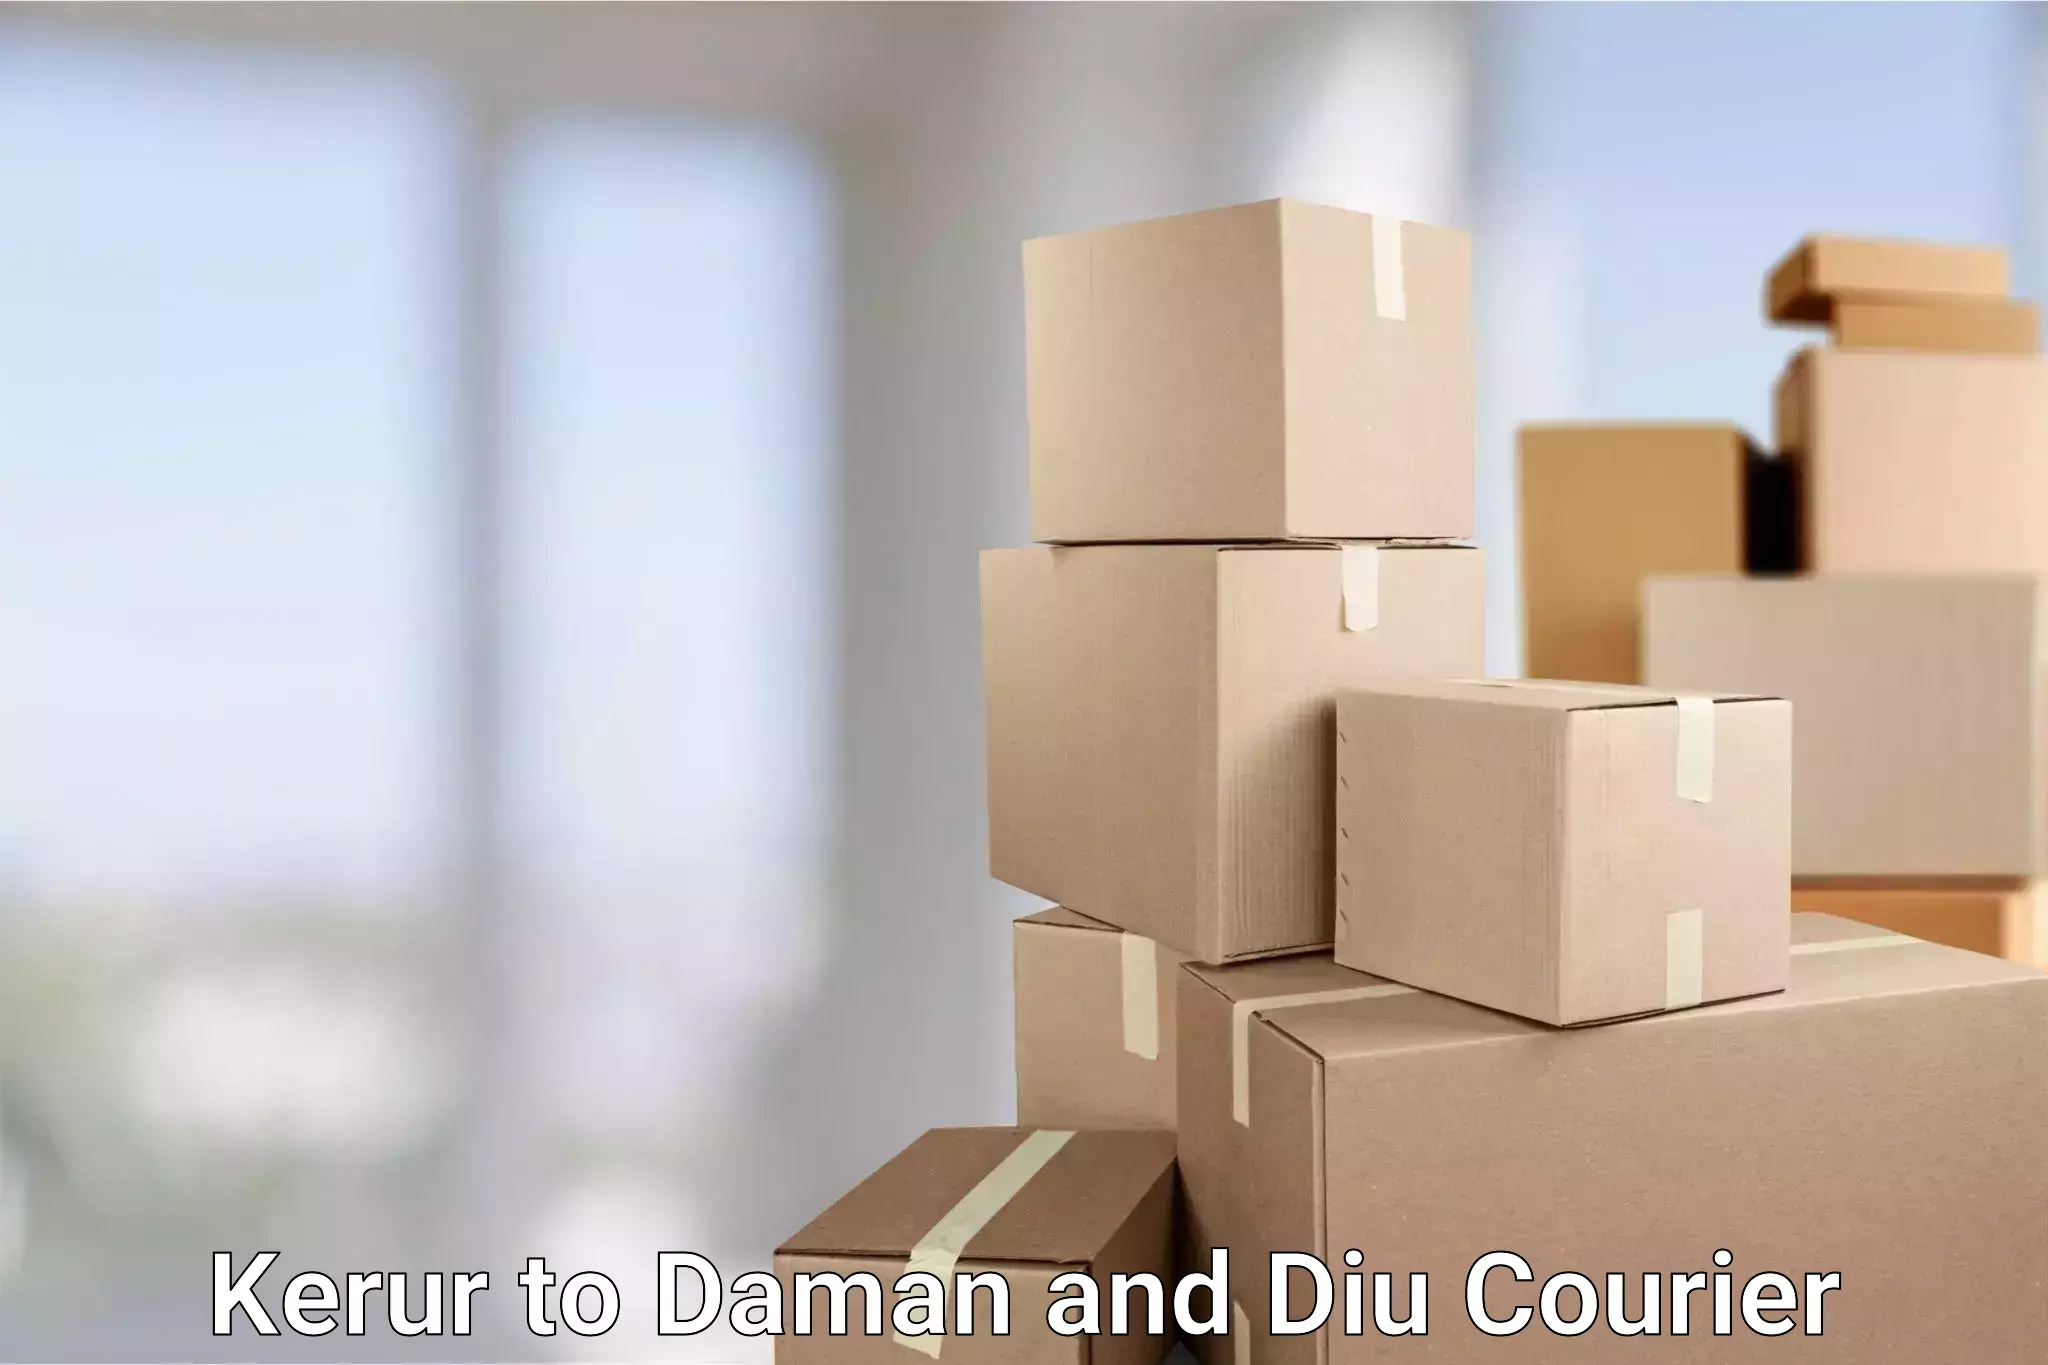 Tailored freight services Kerur to Diu